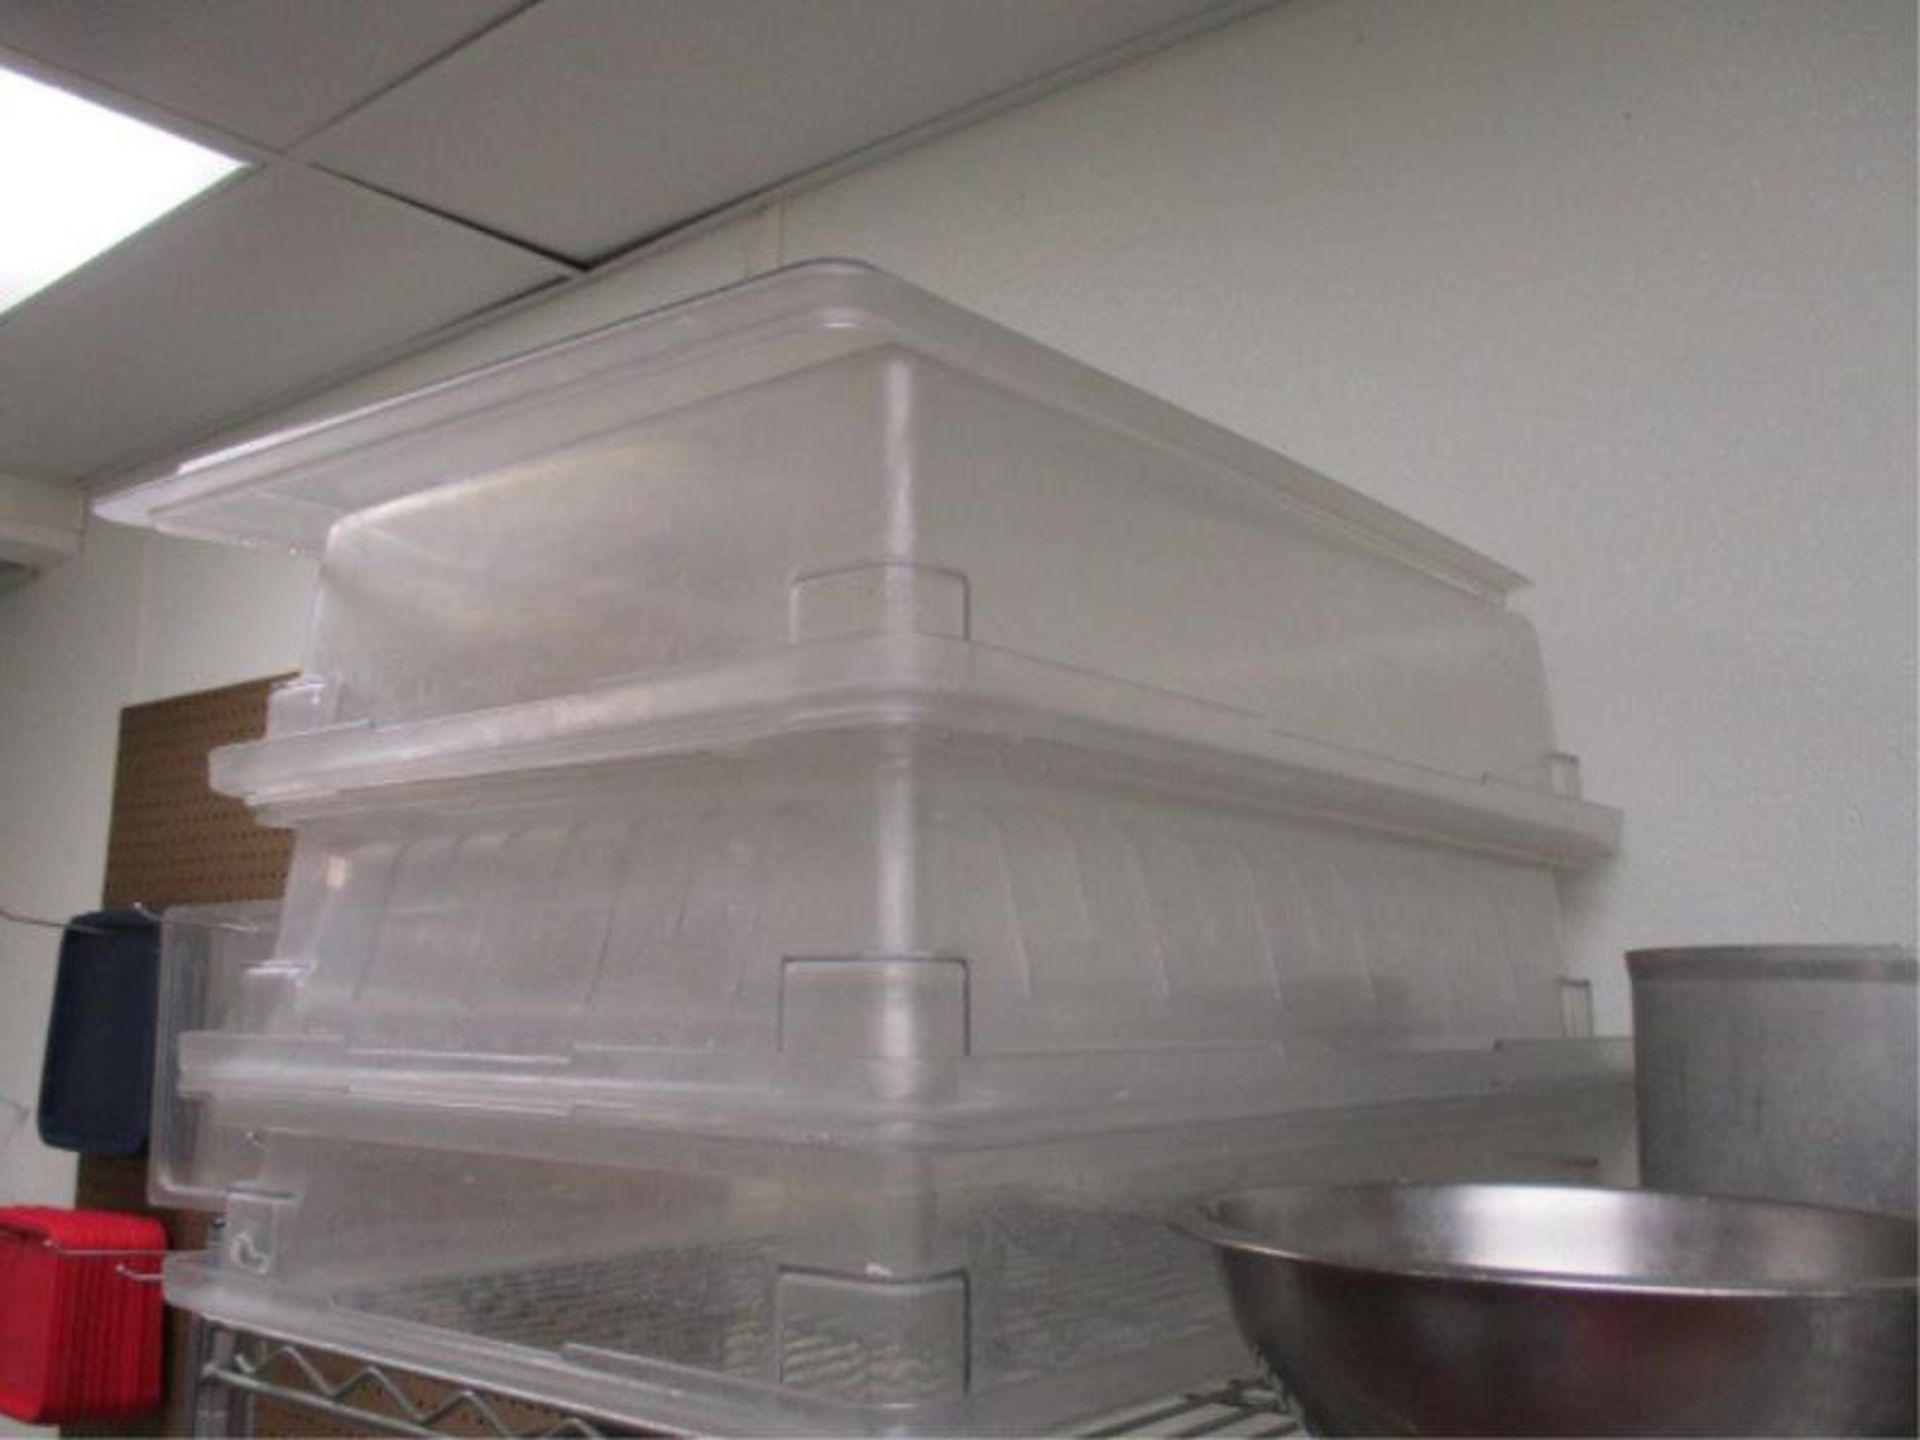 Top Shelf w/ Clear Plastic Storage Bins, (55) Mixing Bowls & Food Storage Containers - Image 3 of 3